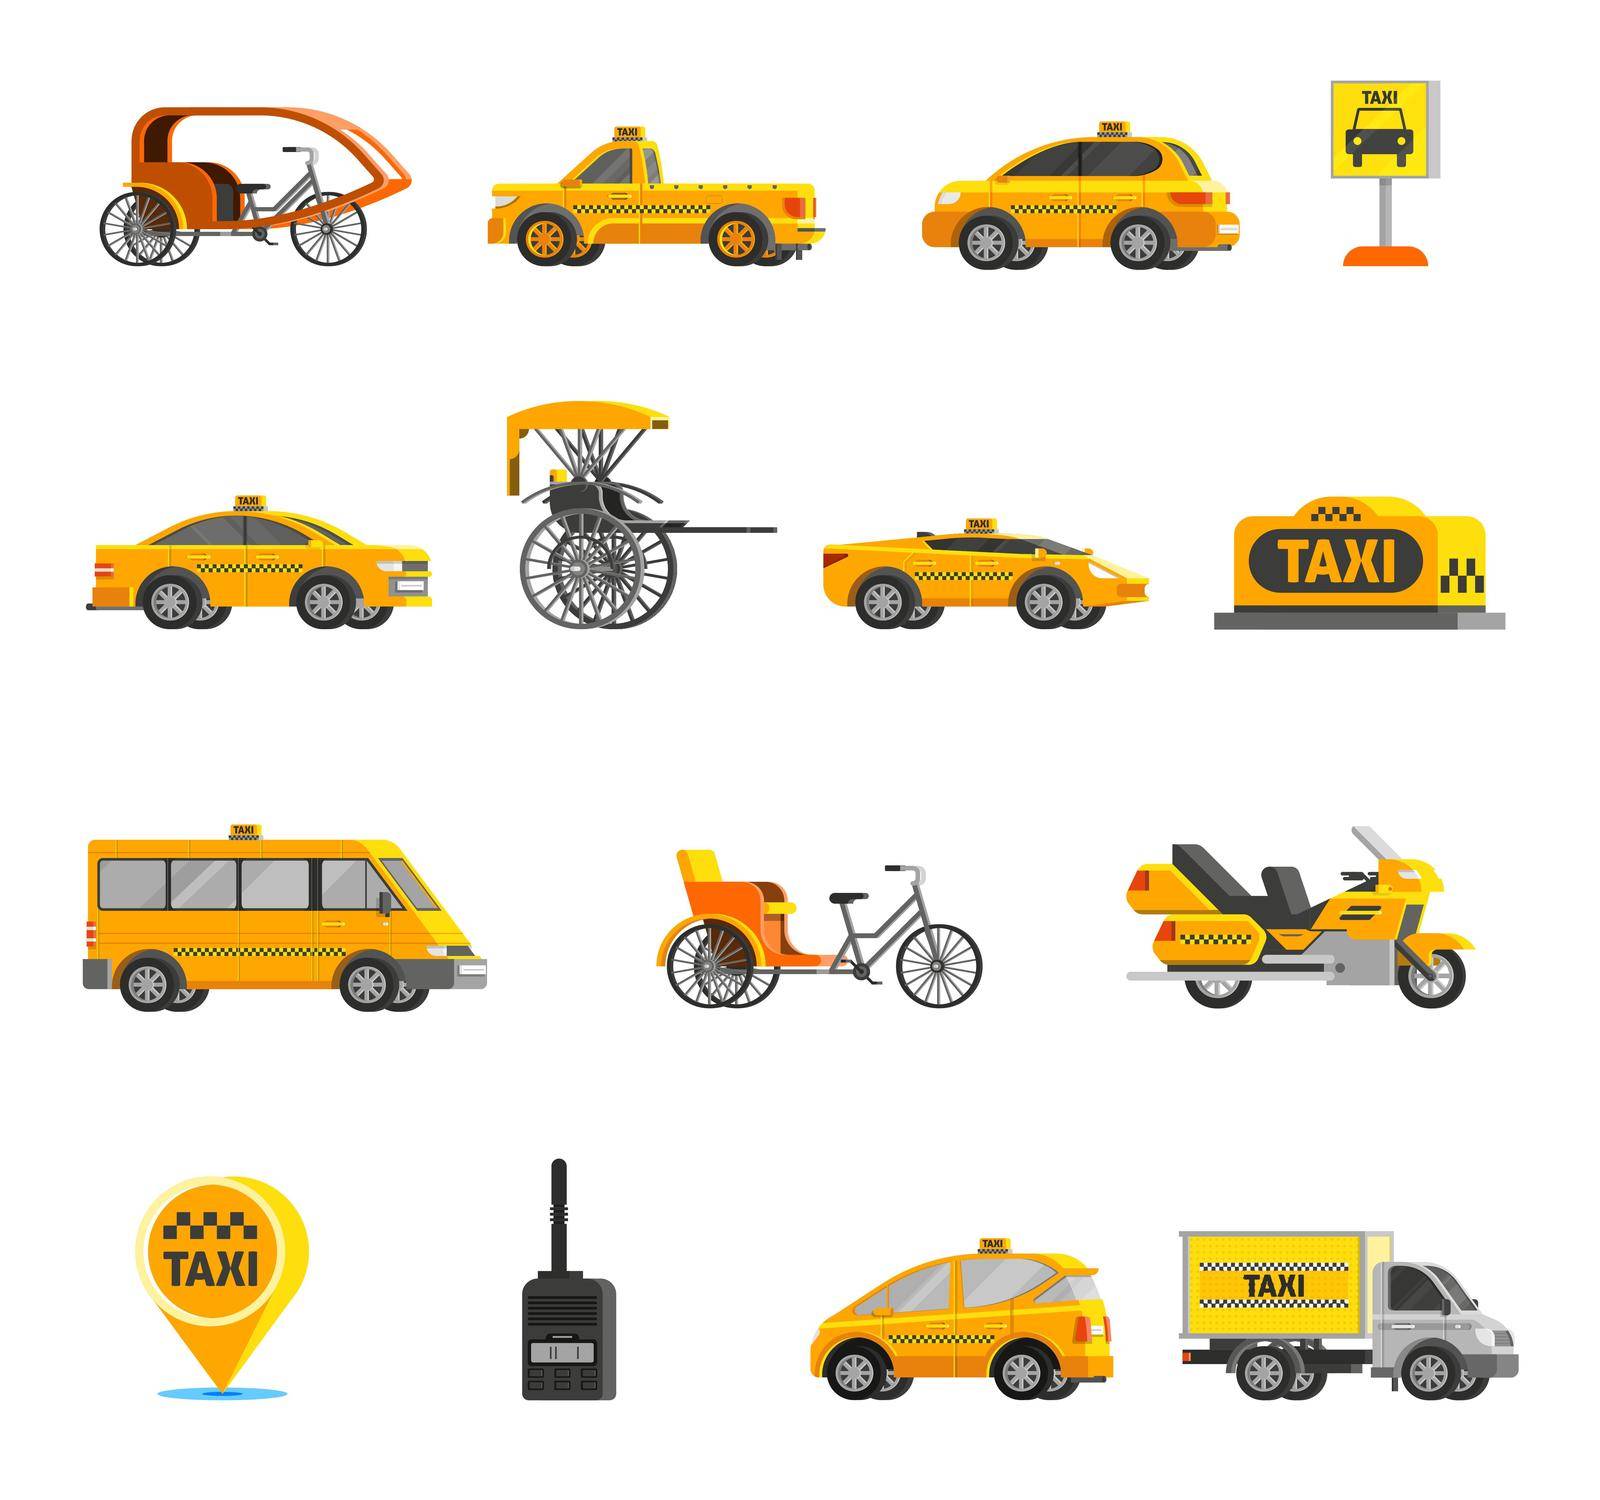 Taxi icons set of different types of vehicles and cars in flat style isolated vector illustration